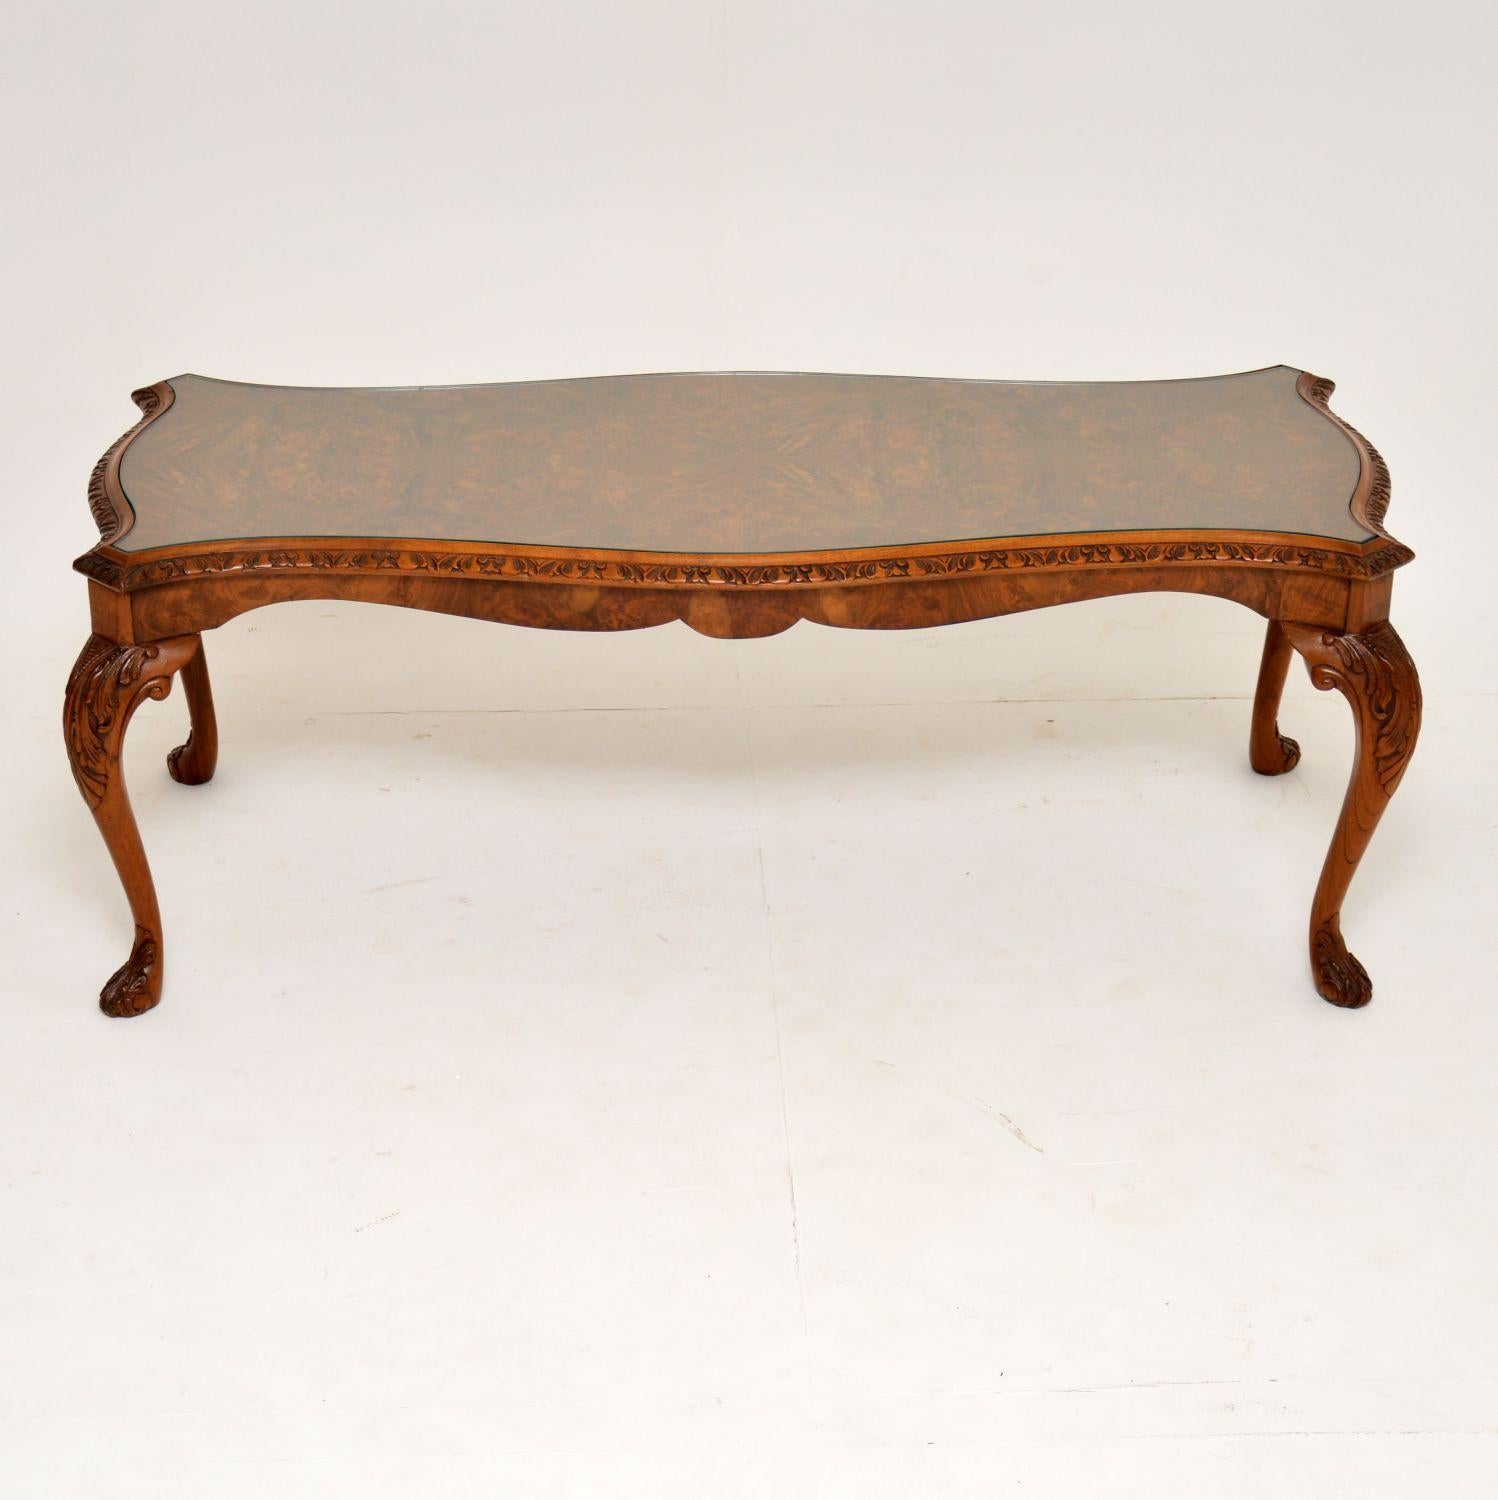 Fine quality antique Queen Anne style walnut coffee table in excellent condition and dating from circa 1930s period.

It has a shaped burr walnut top, with a carved edge and a burr walnut frieze. The solid walnut legs are finely carved on the tops